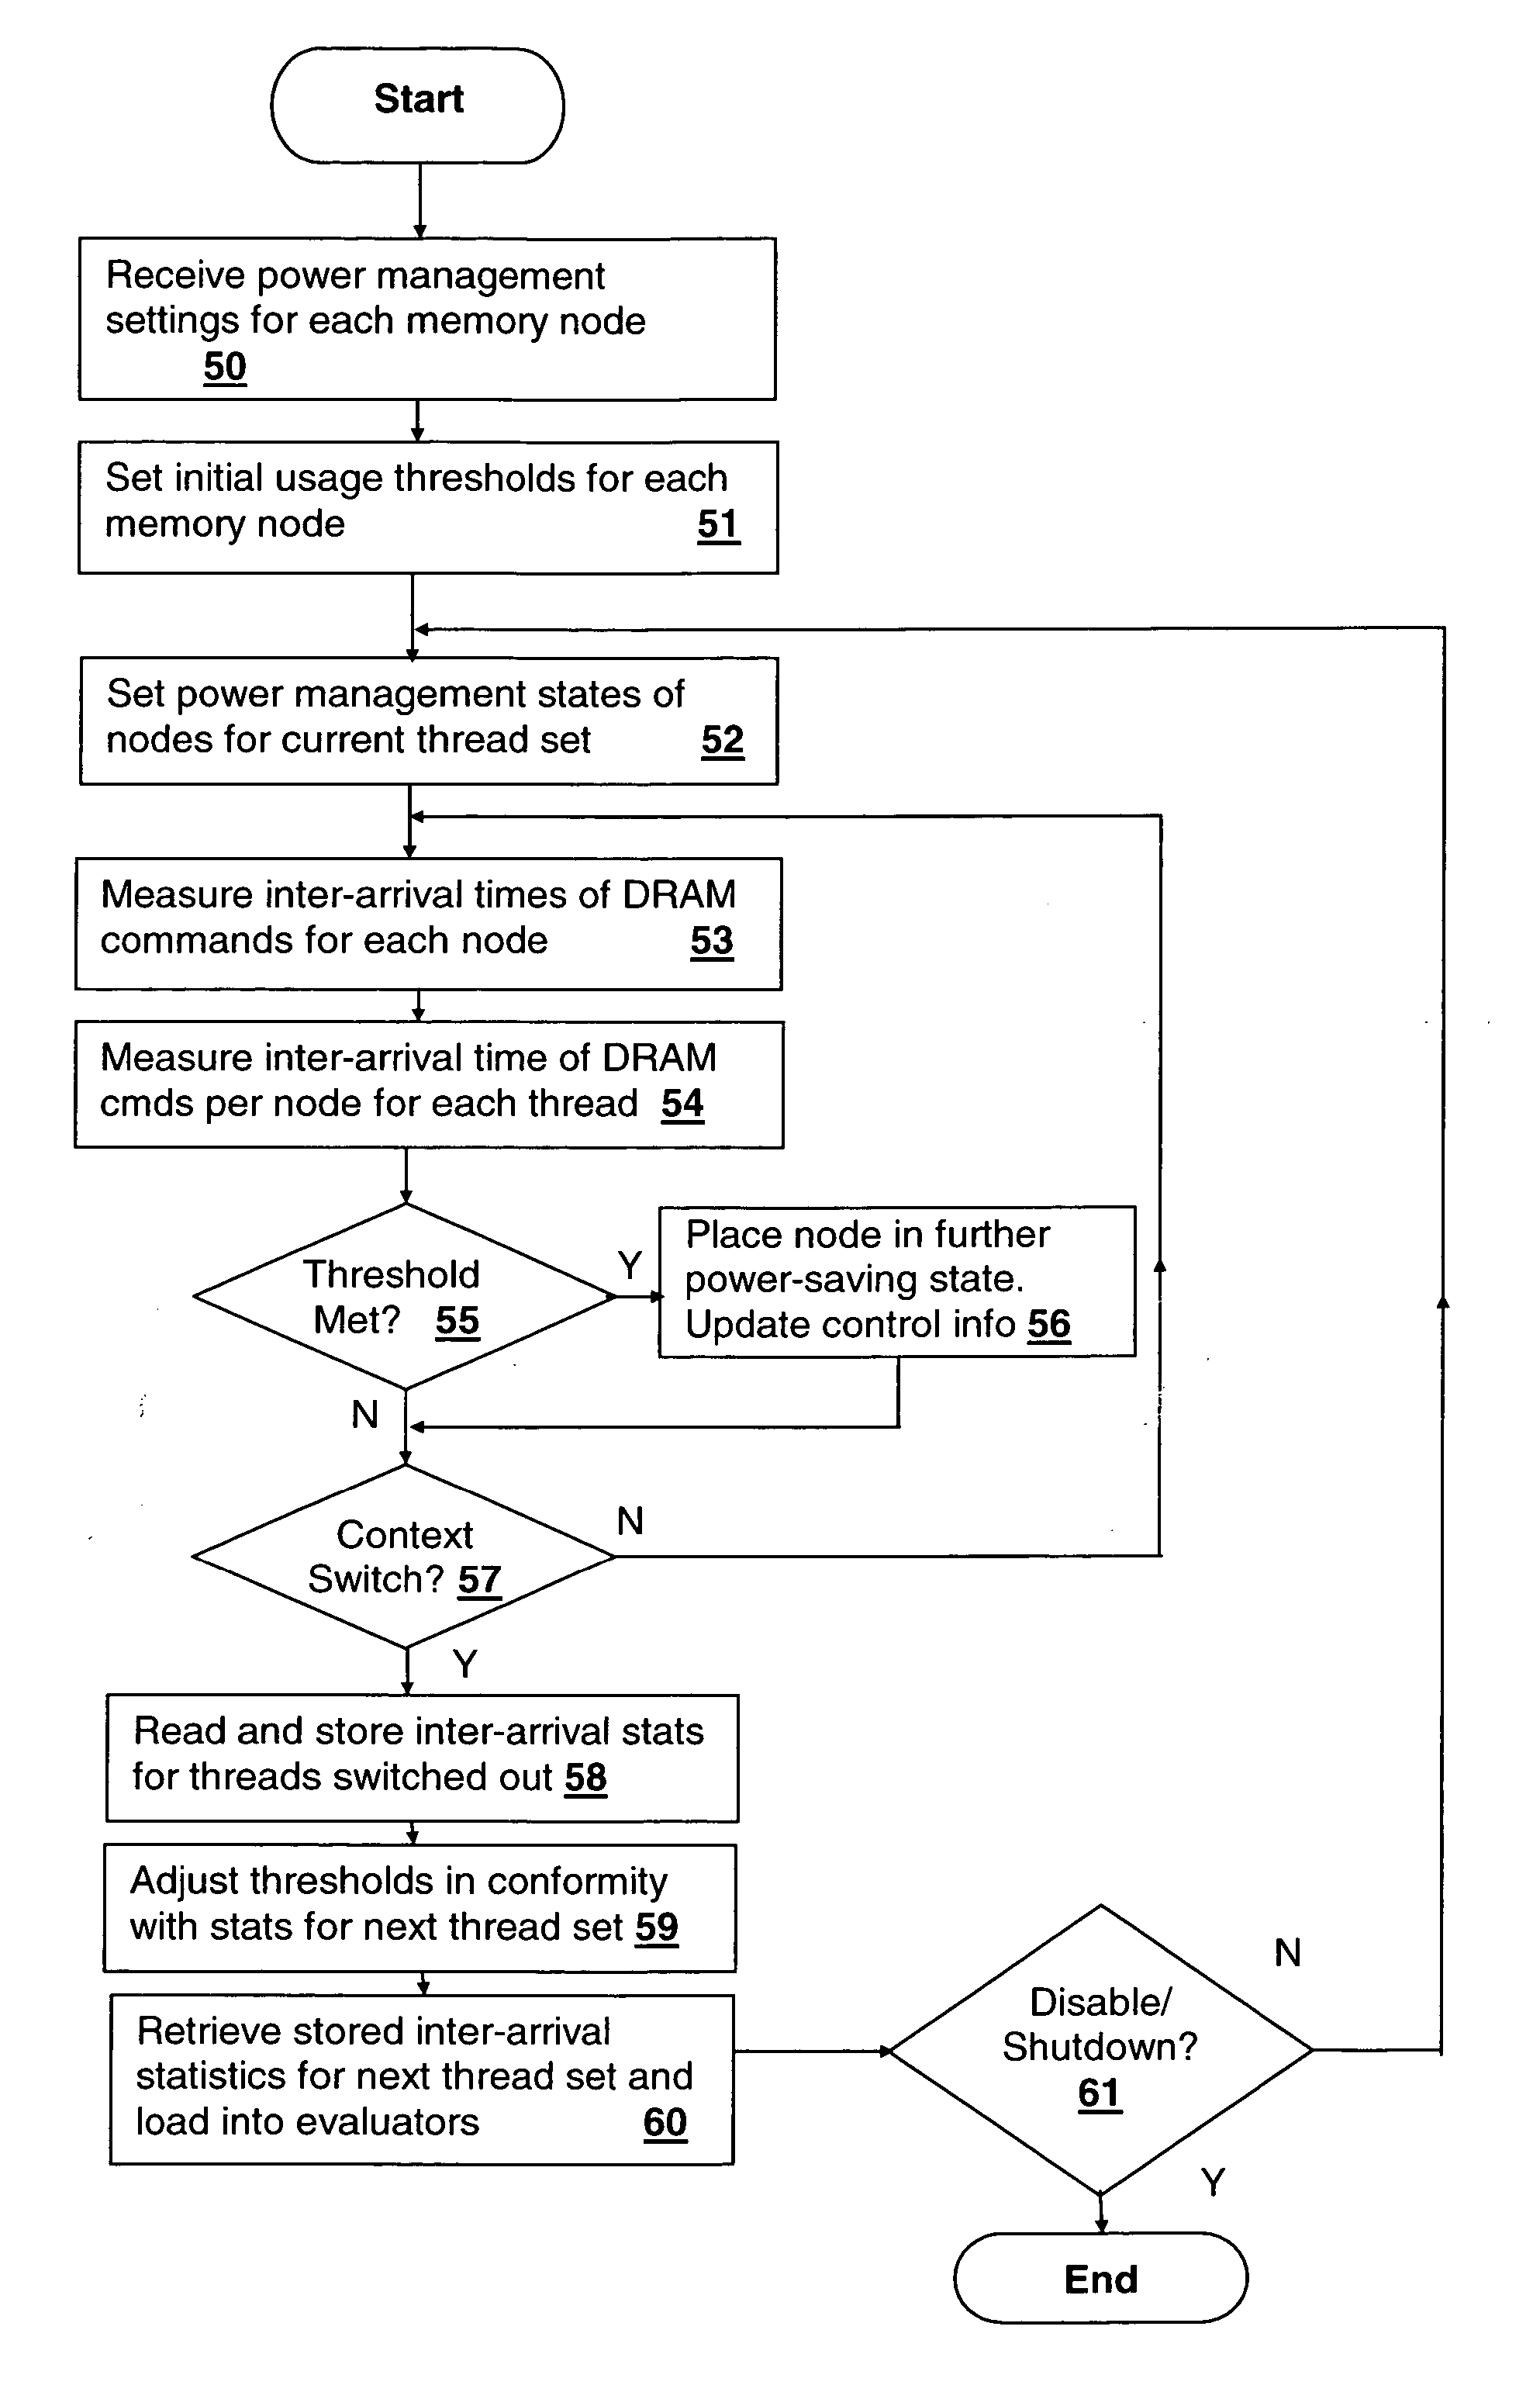 Method and system for energy management in a simultaneous multi-threaded (SMT) processing system including per-thread device usage monitoring